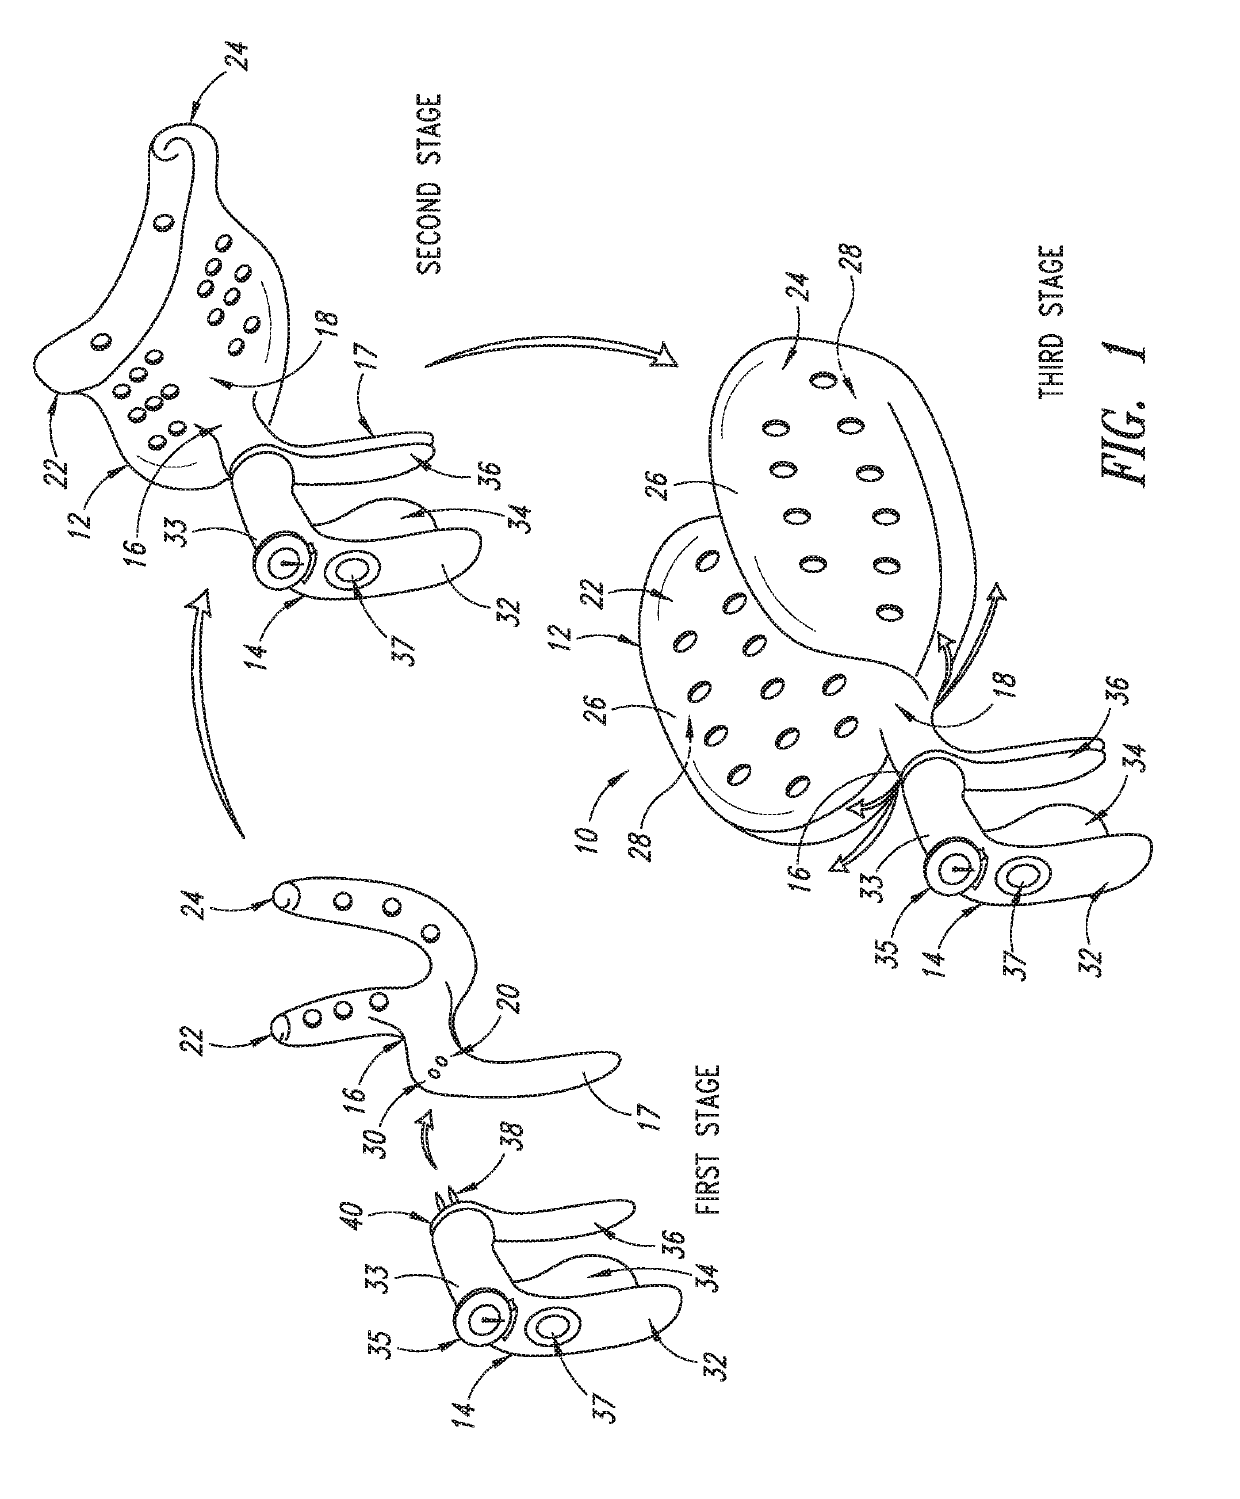 Apparatus to protect the pelvic floor during vaginal childbirth